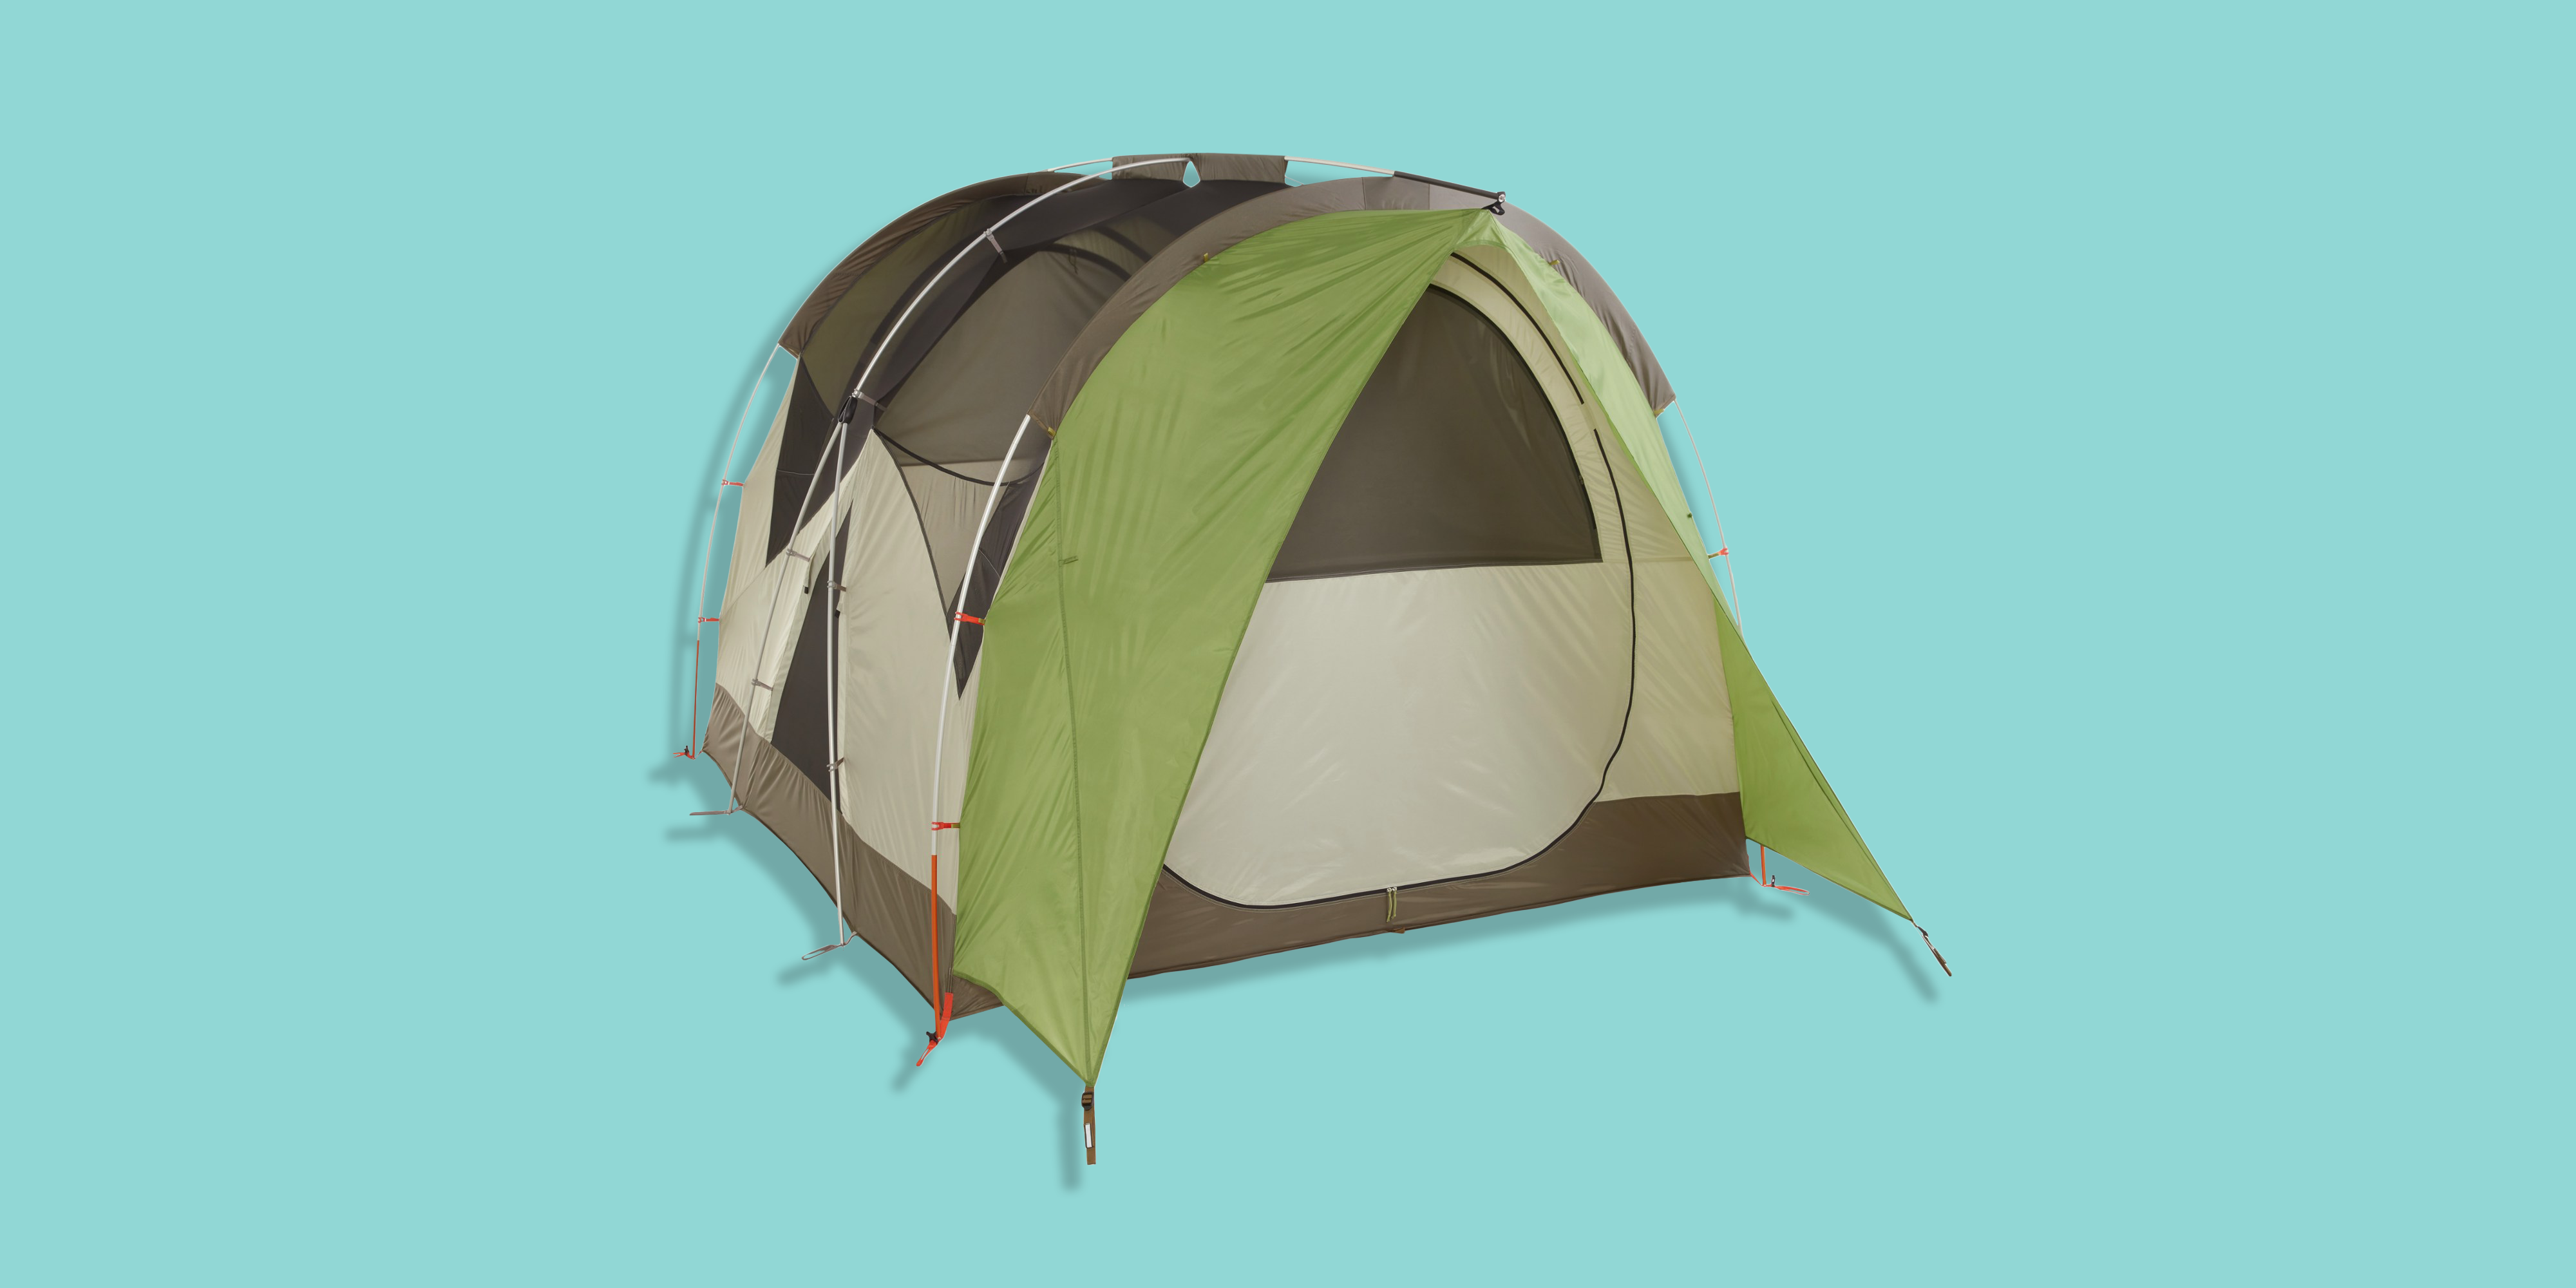 Opknappen Mysterie tiener 5 Best Camping Tents in 2023, Tested by Experts